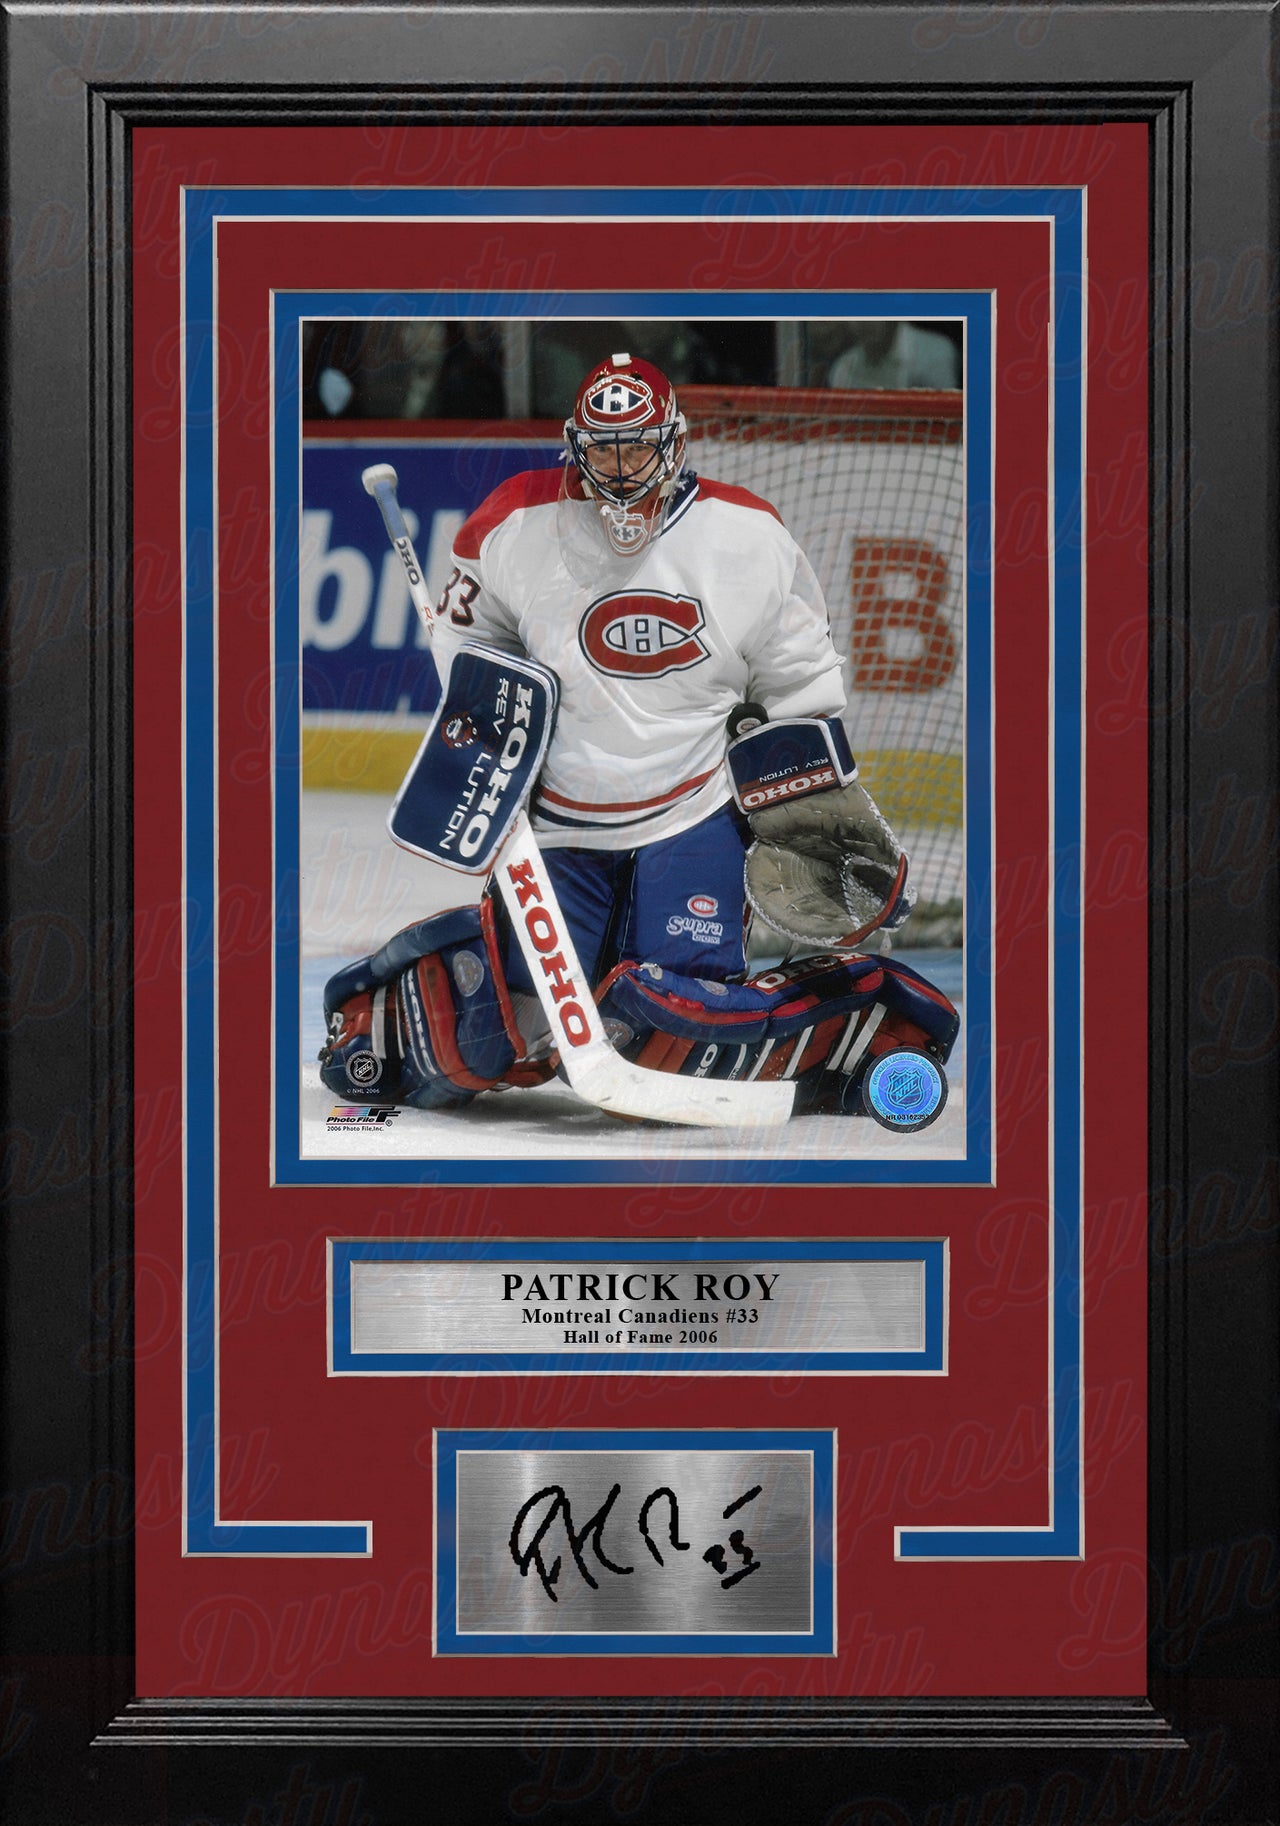 Patrick Roy in Action Montreal Canadiens 8" x 10" Framed Hockey Photo with Engraved Autograph - Dynasty Sports & Framing 